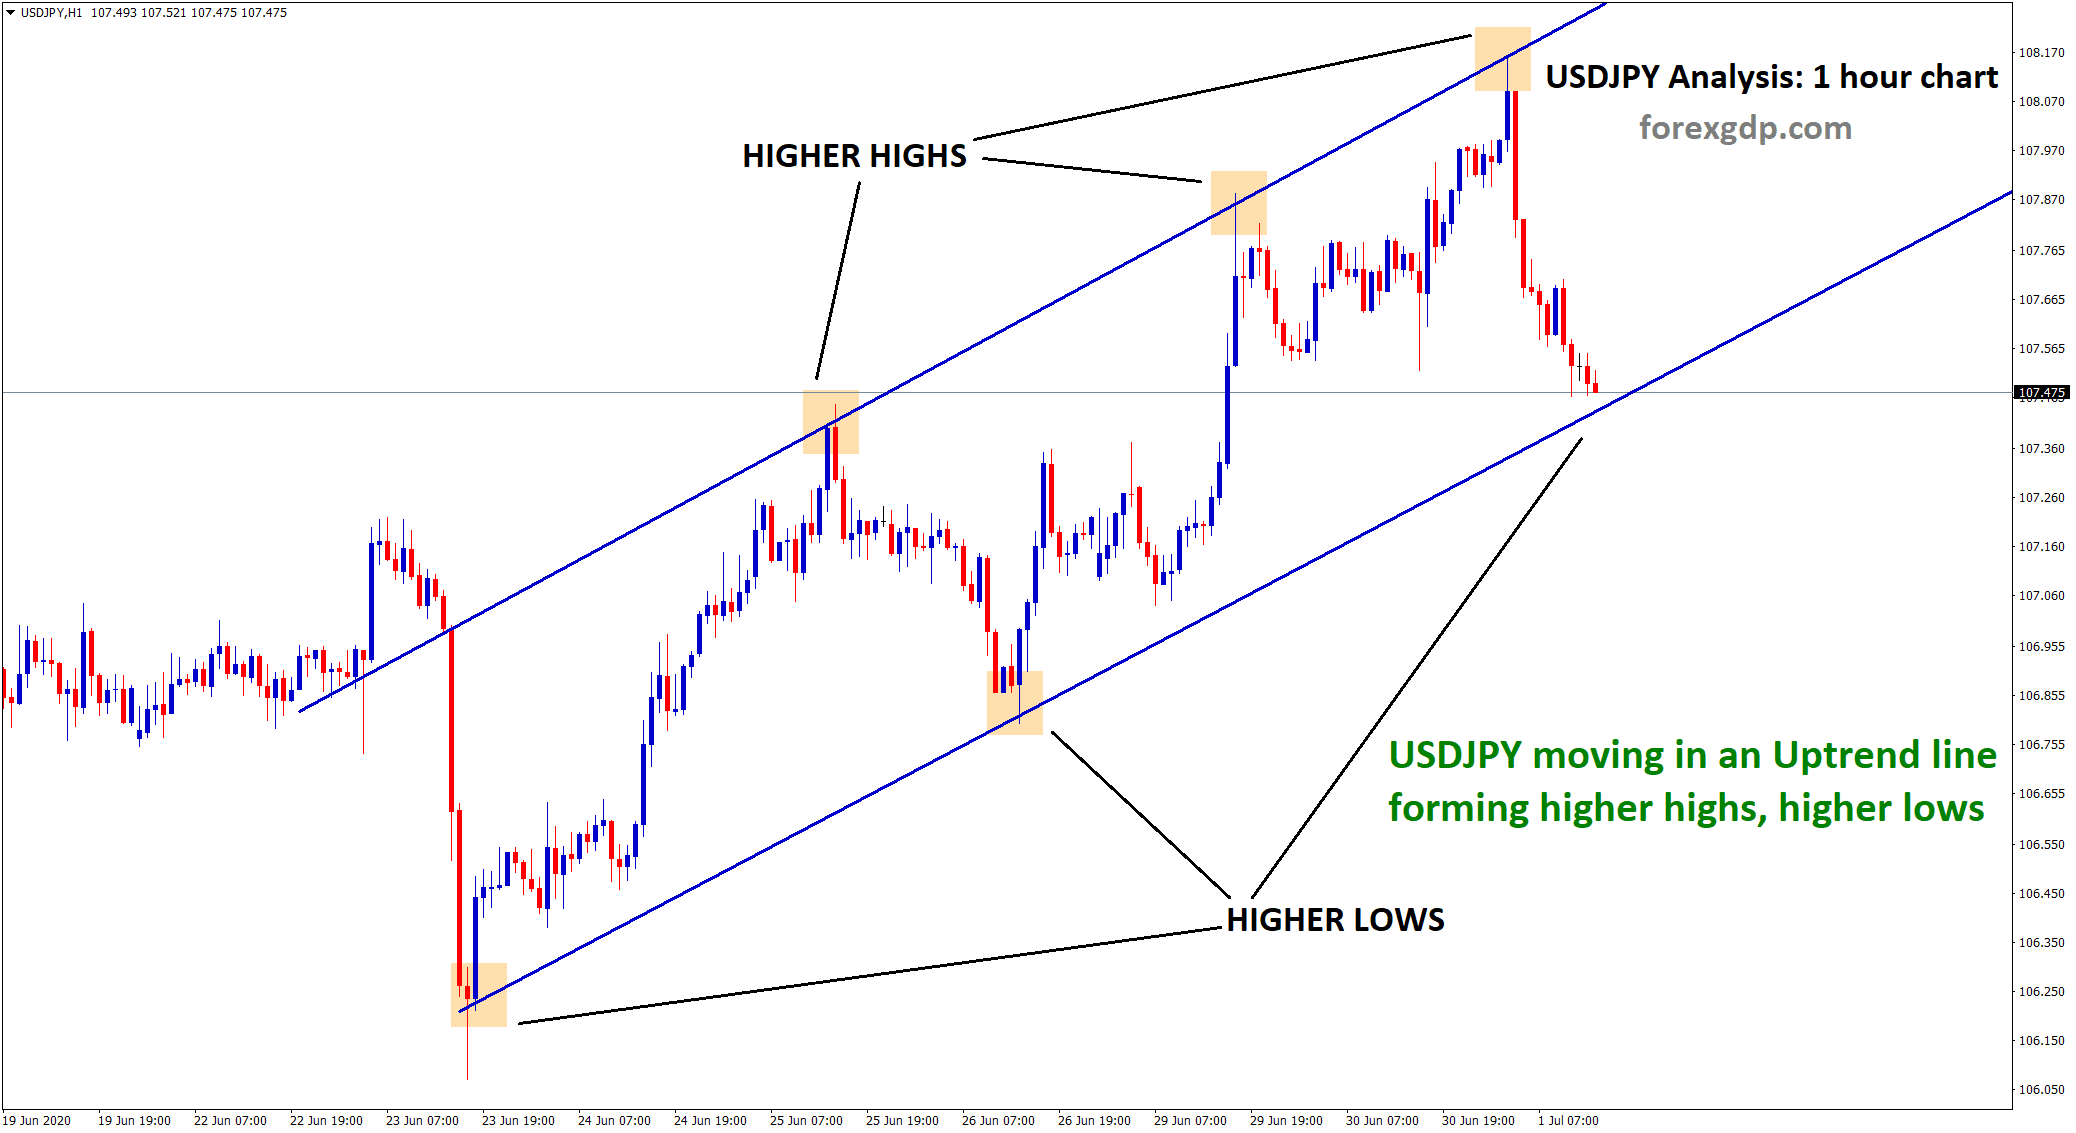 USDJPY moving in an uptrend line forming higher high higher low